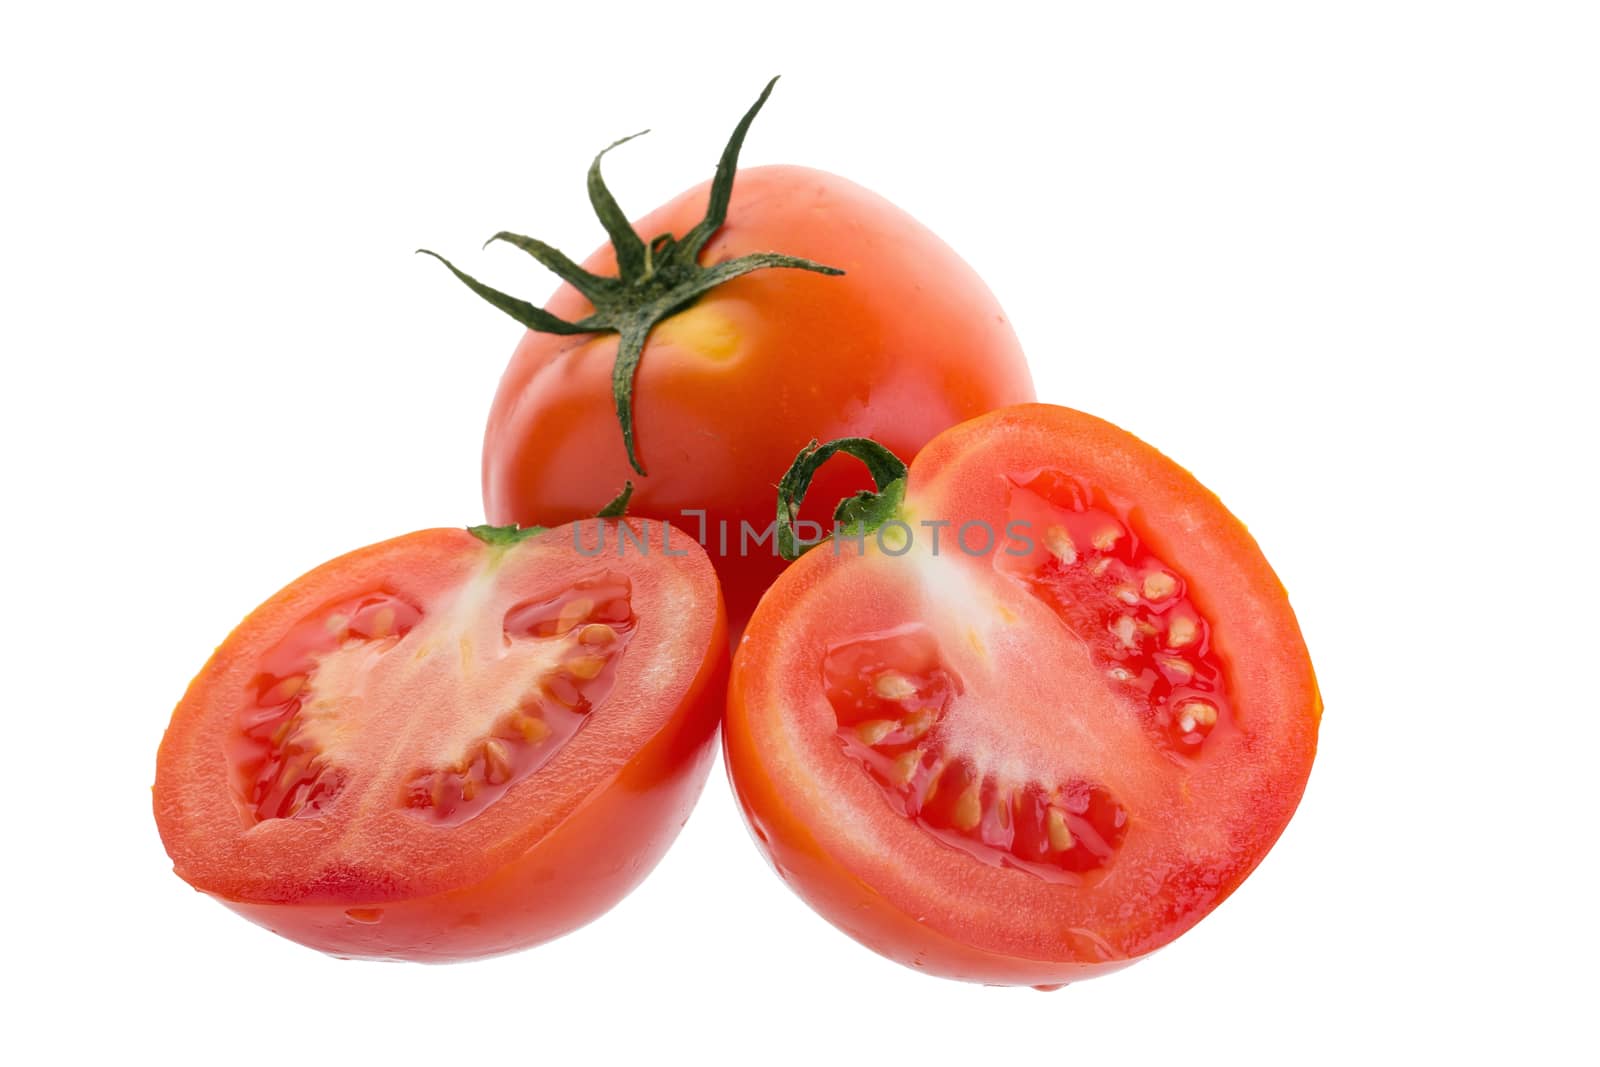 Slice of tomato isolated on a white background.